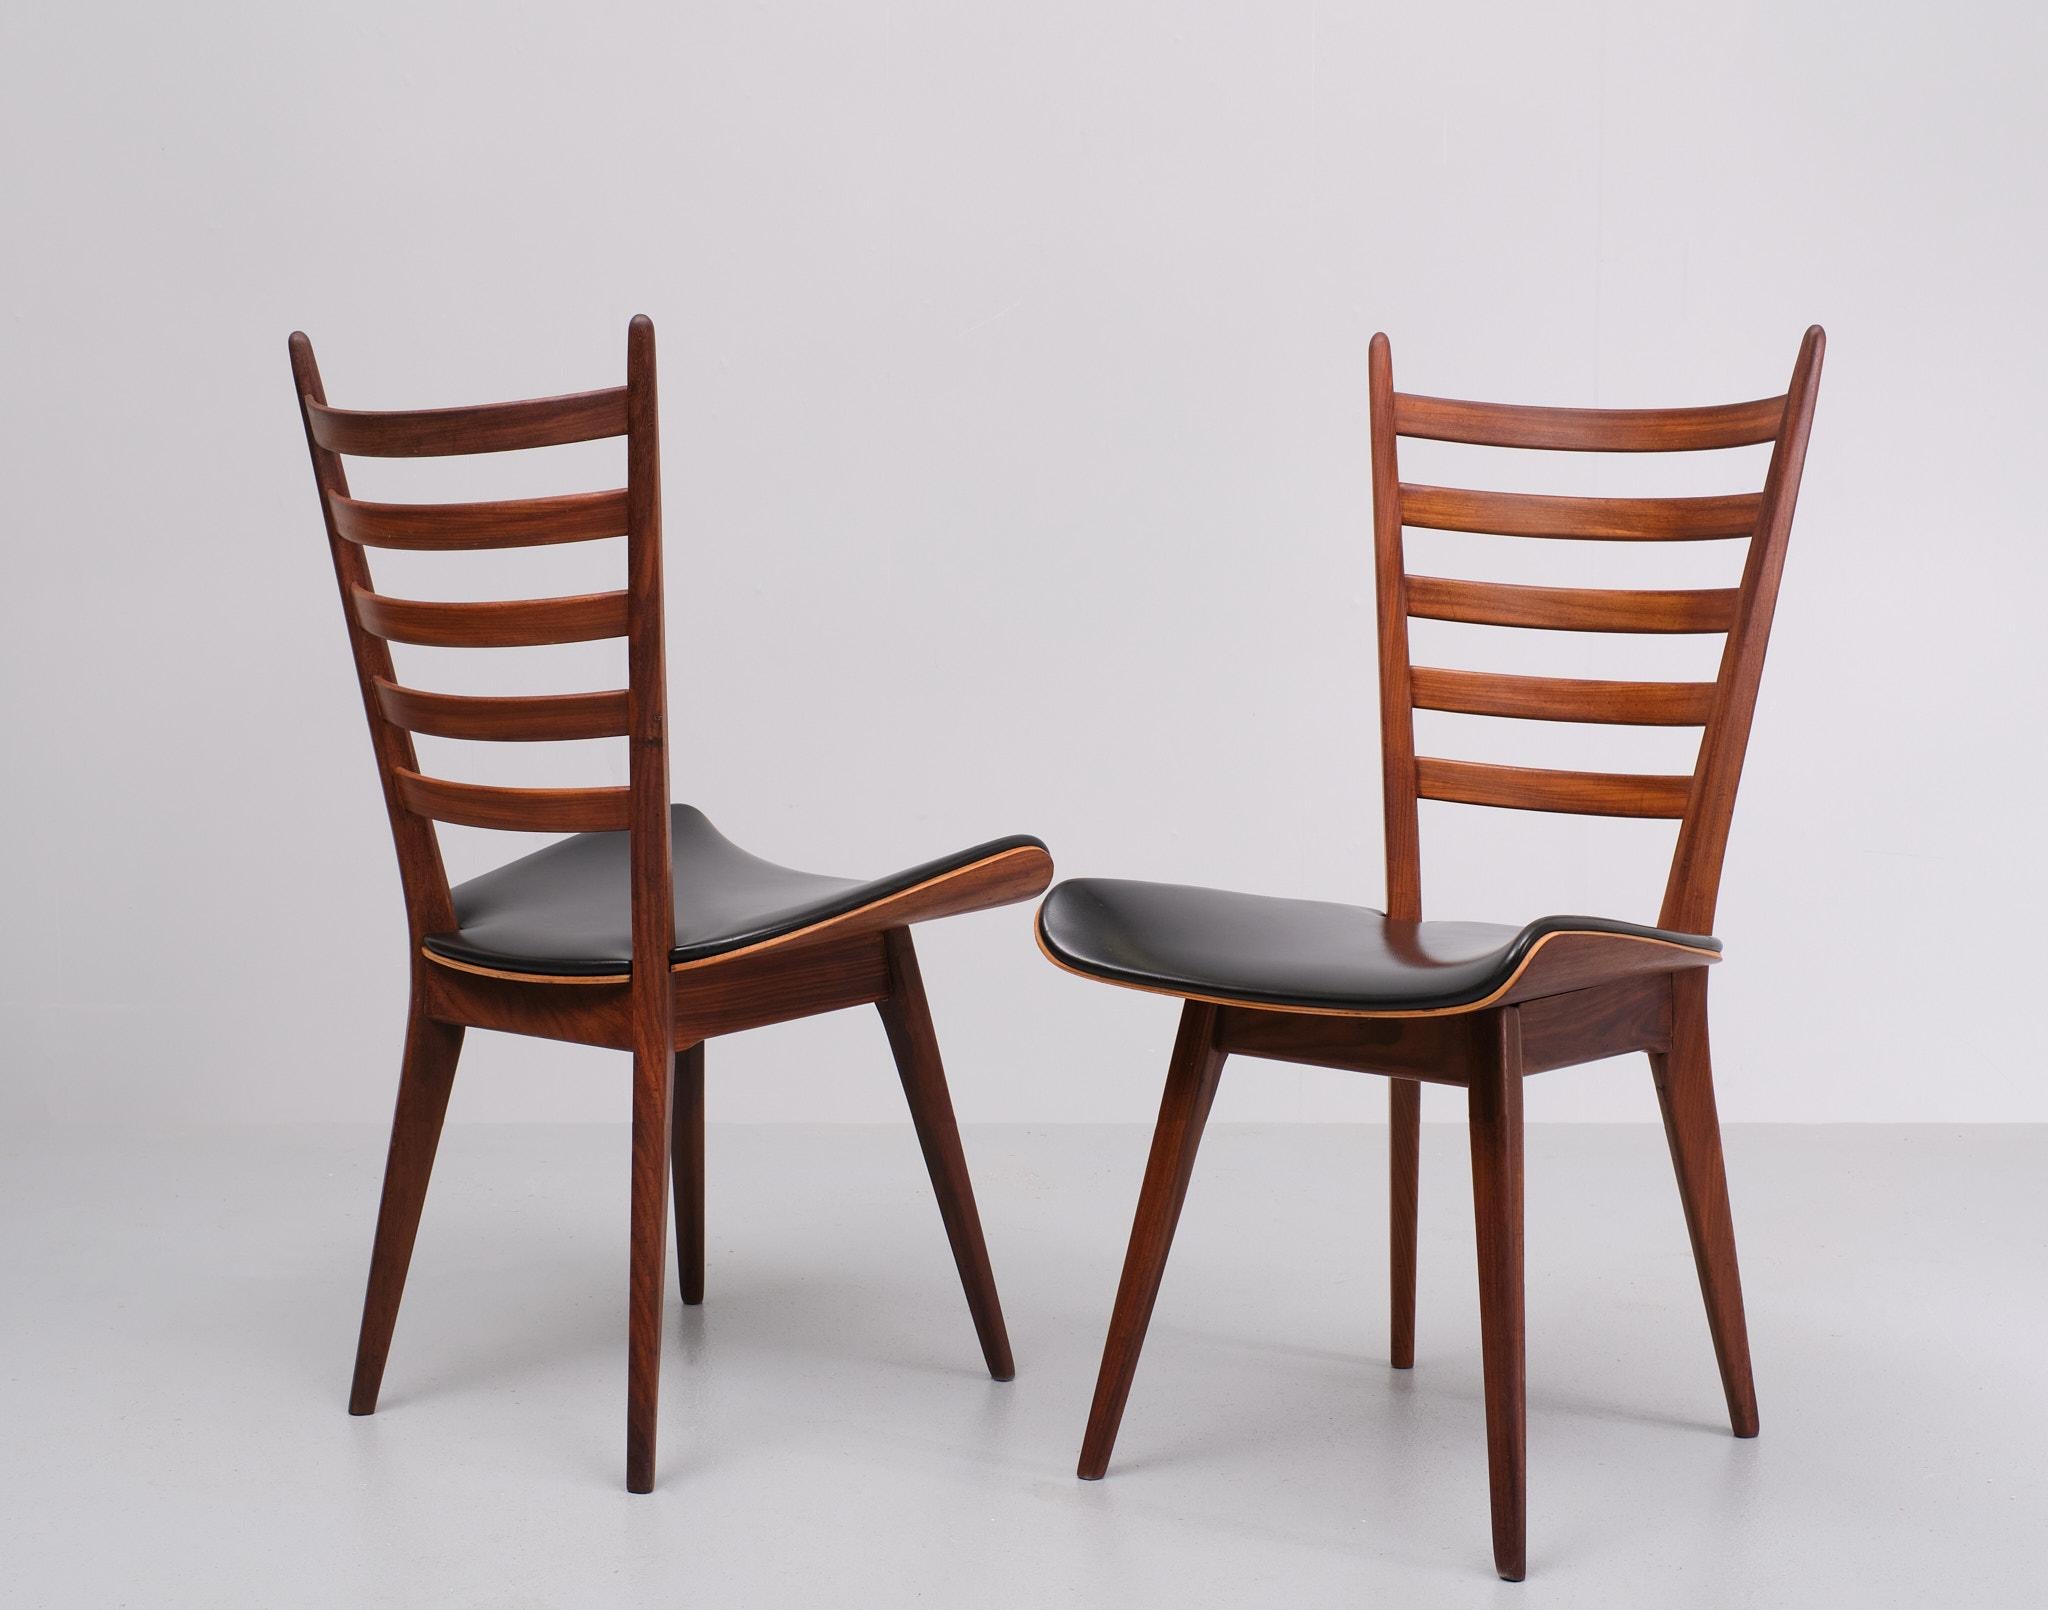 Cees Braakman  curved ladder chairs 1950s  Holland  For Sale 1